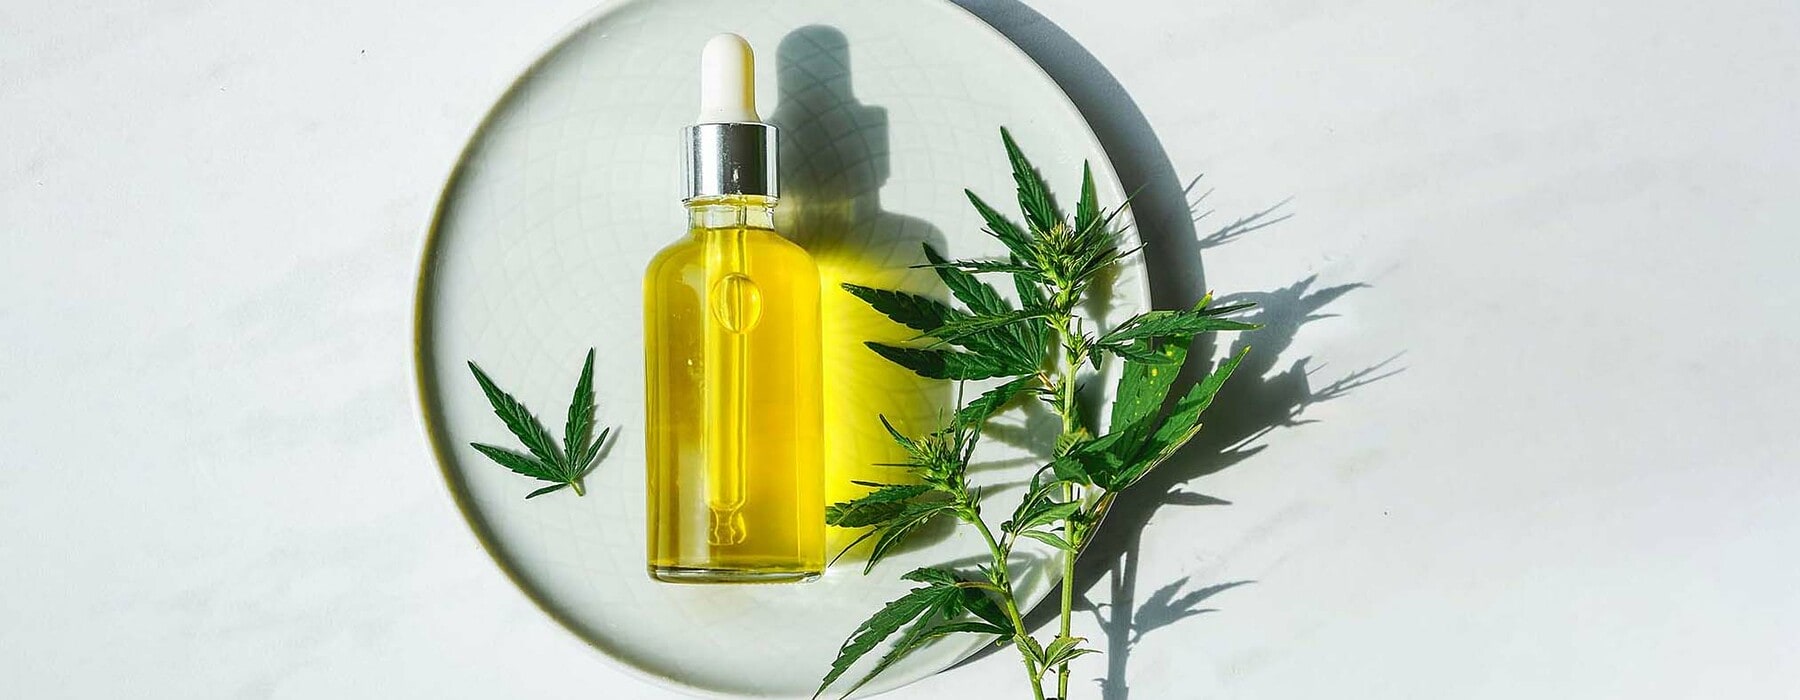 CBD Oil bottle and dropper on a small plate and on a marble surface. Cannabis leaves nearby. Flat lay, minimalism. Beauty photo with contrasting sun shadows